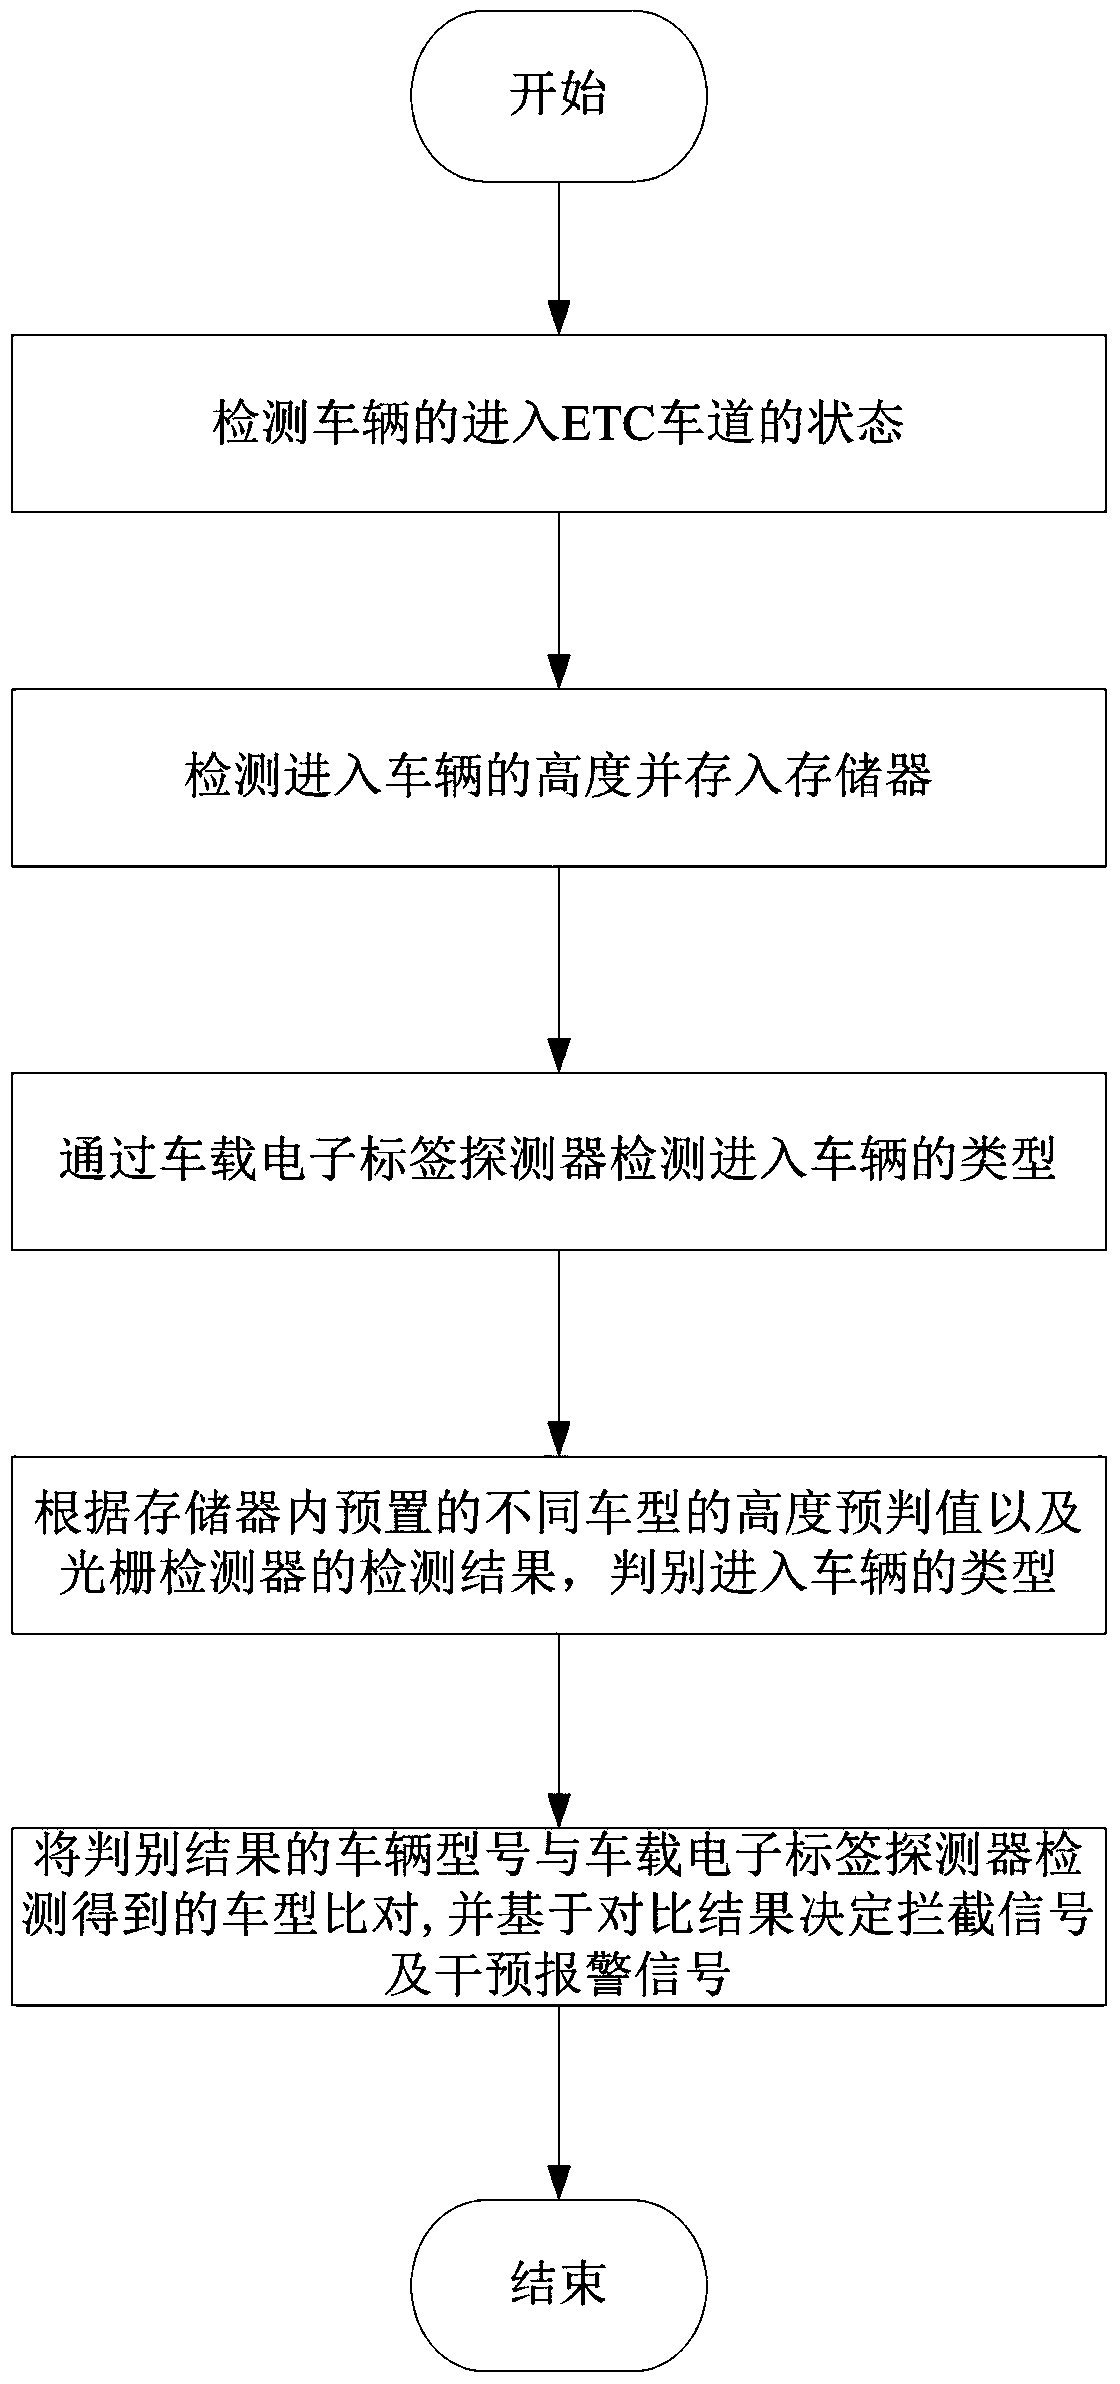 Electronic non-stop toll collection method based on electronic non-stop toll collection system capable of preventing toll evasion